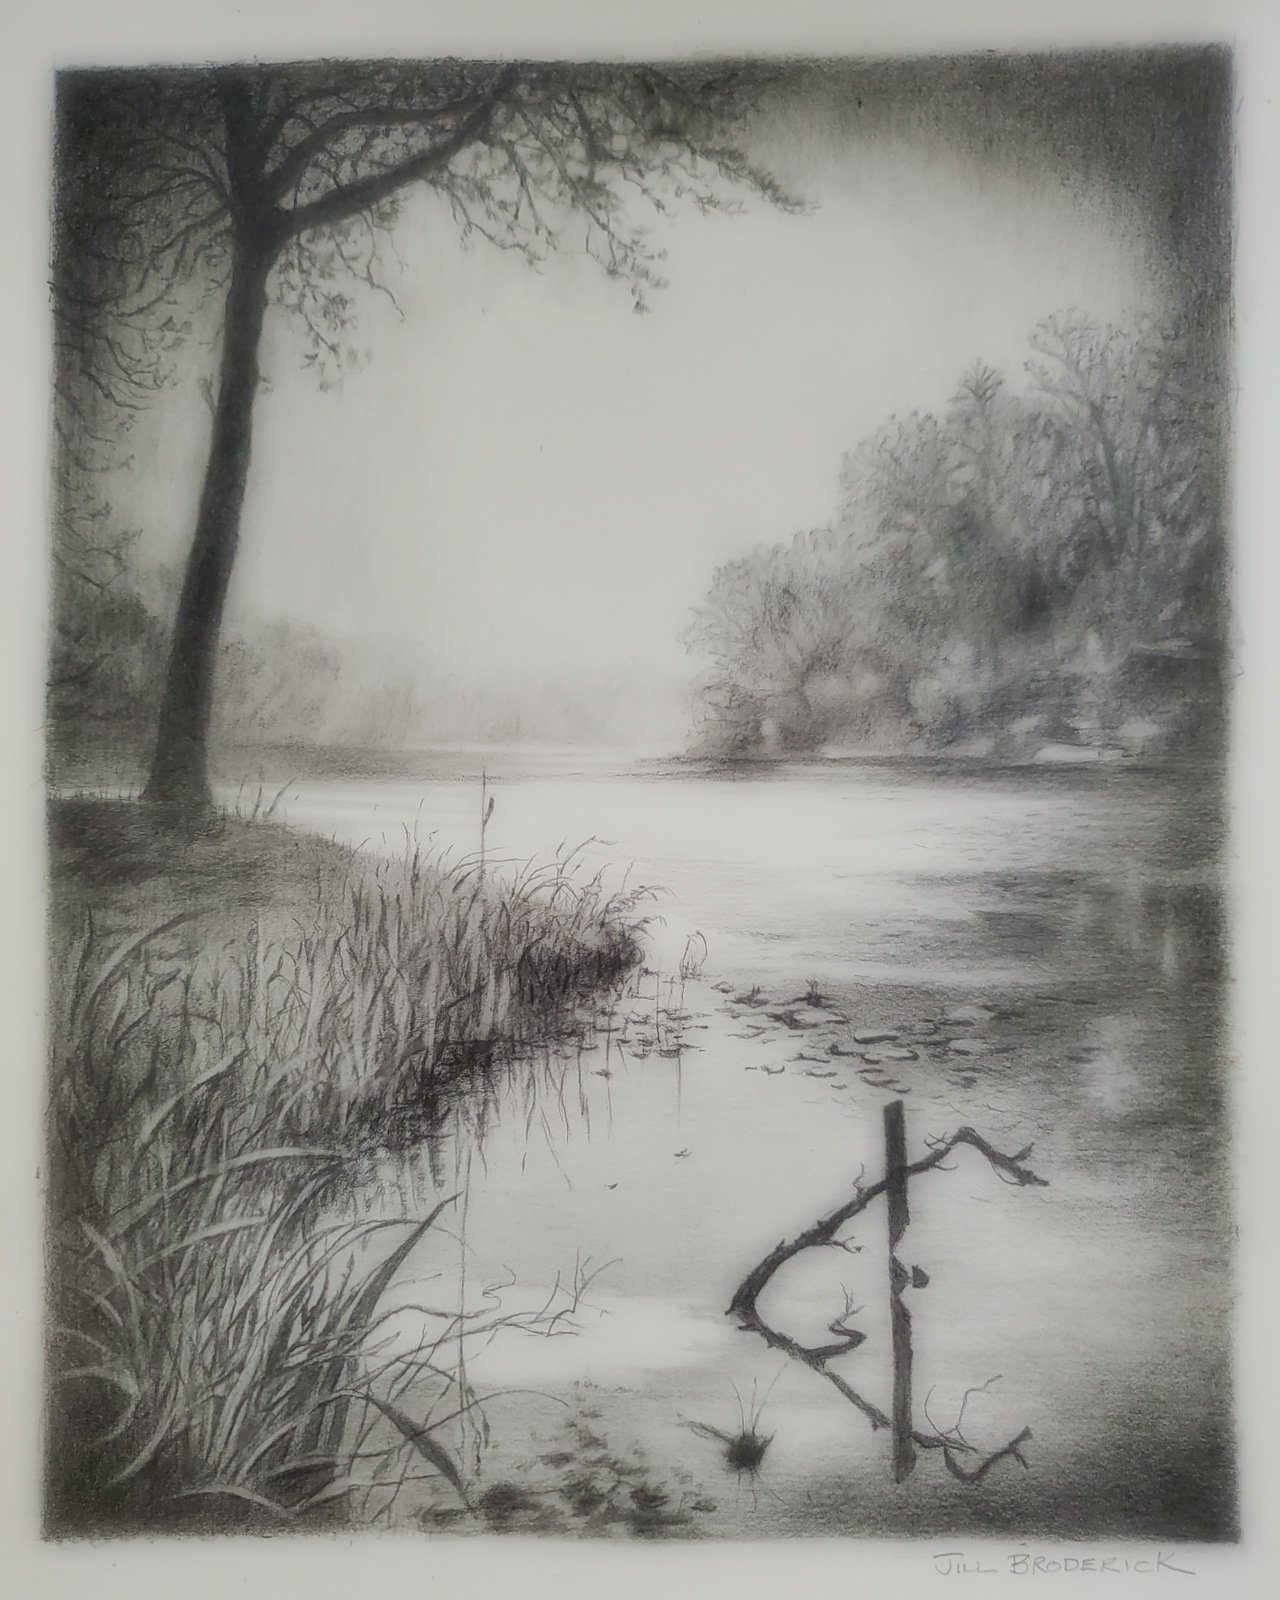 MISTY MORNING - GRAPHITE ON PAPER - 8X10 IN.